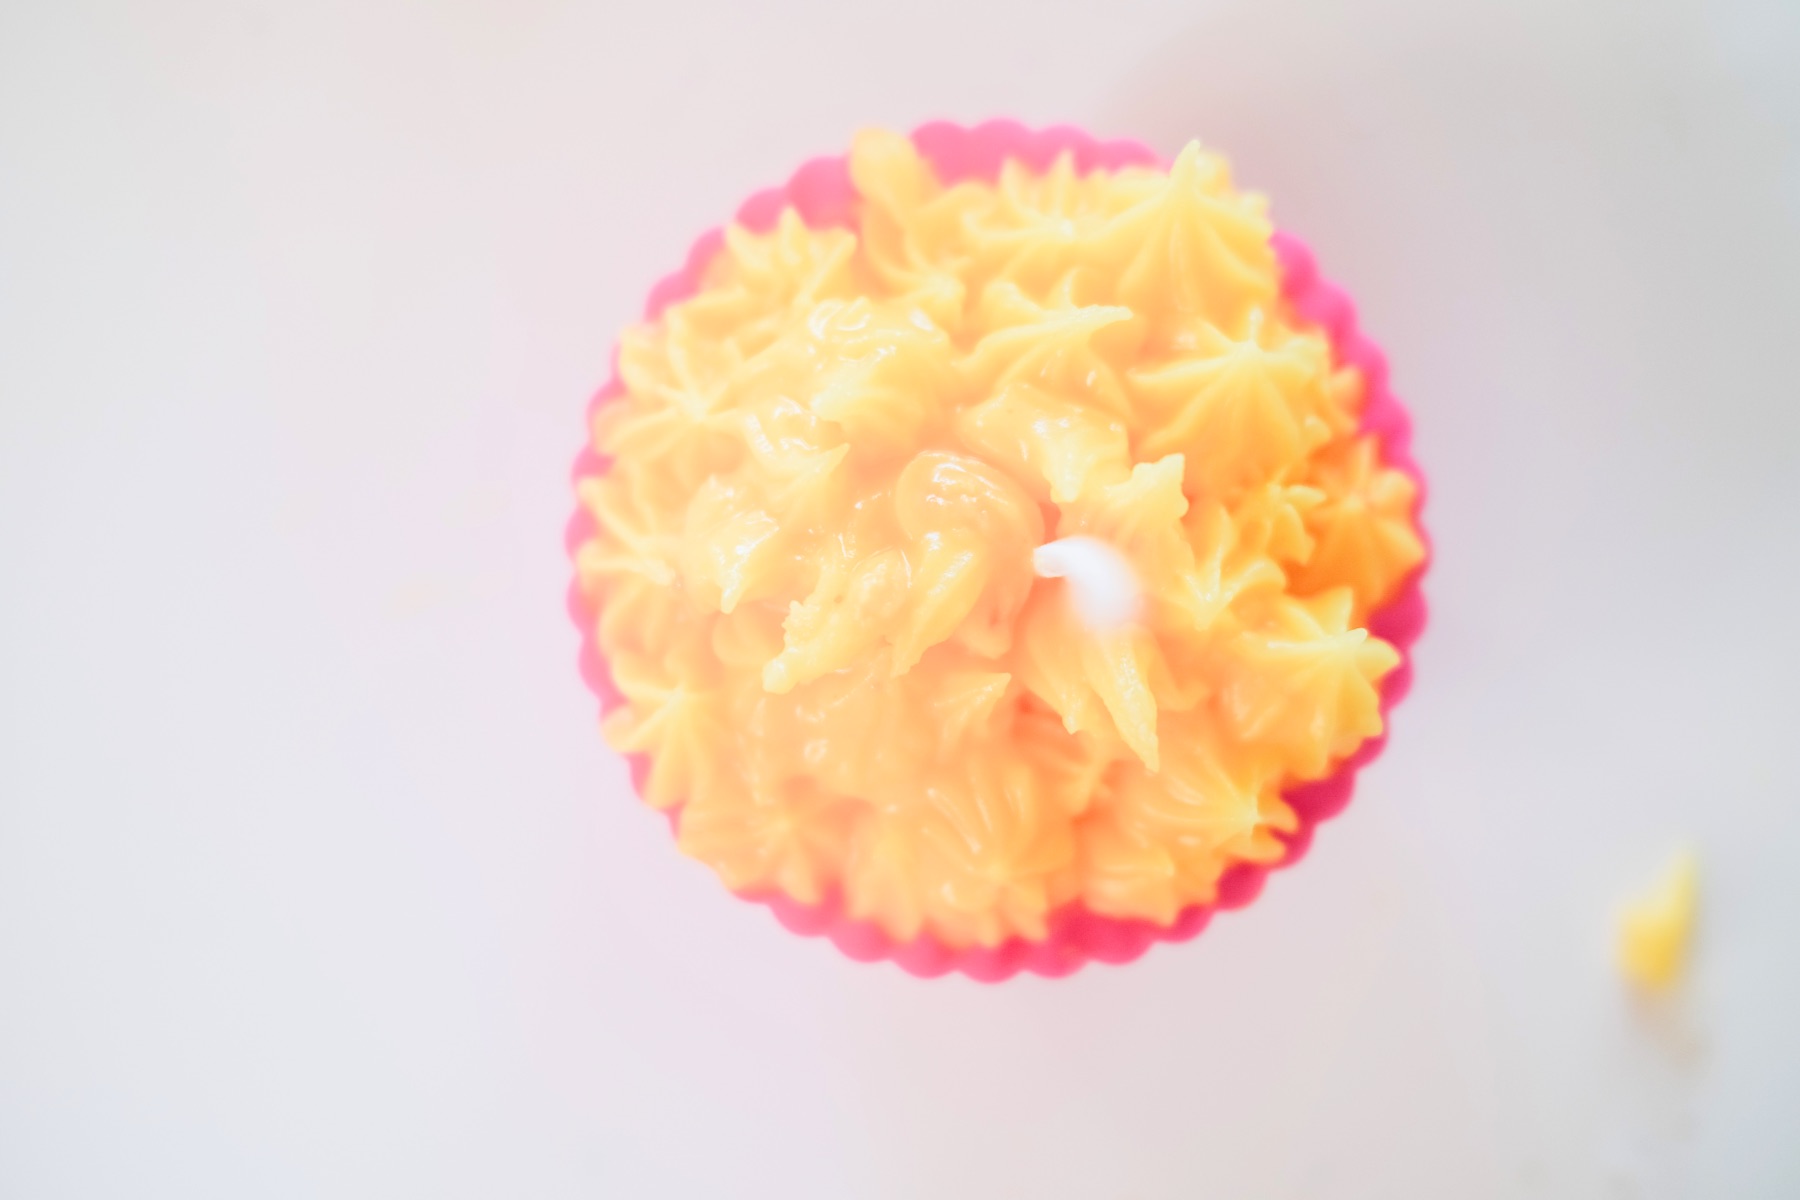 frosting a cupcake candle diy tutorial